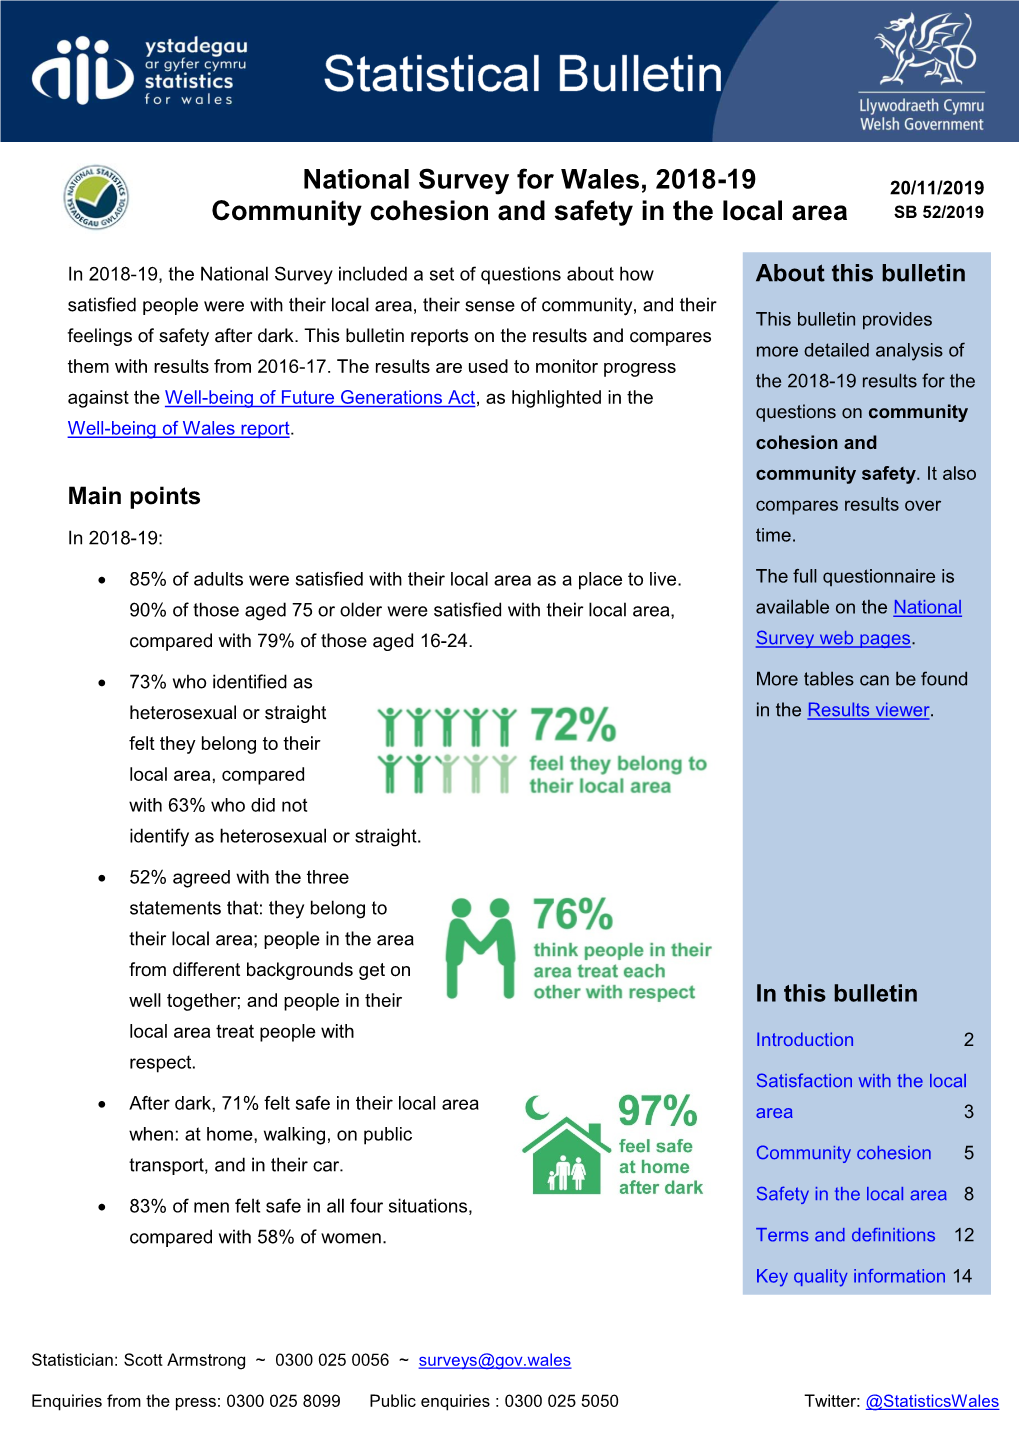 Community Cohesion and Safety in the Local (National Survey for Wales)